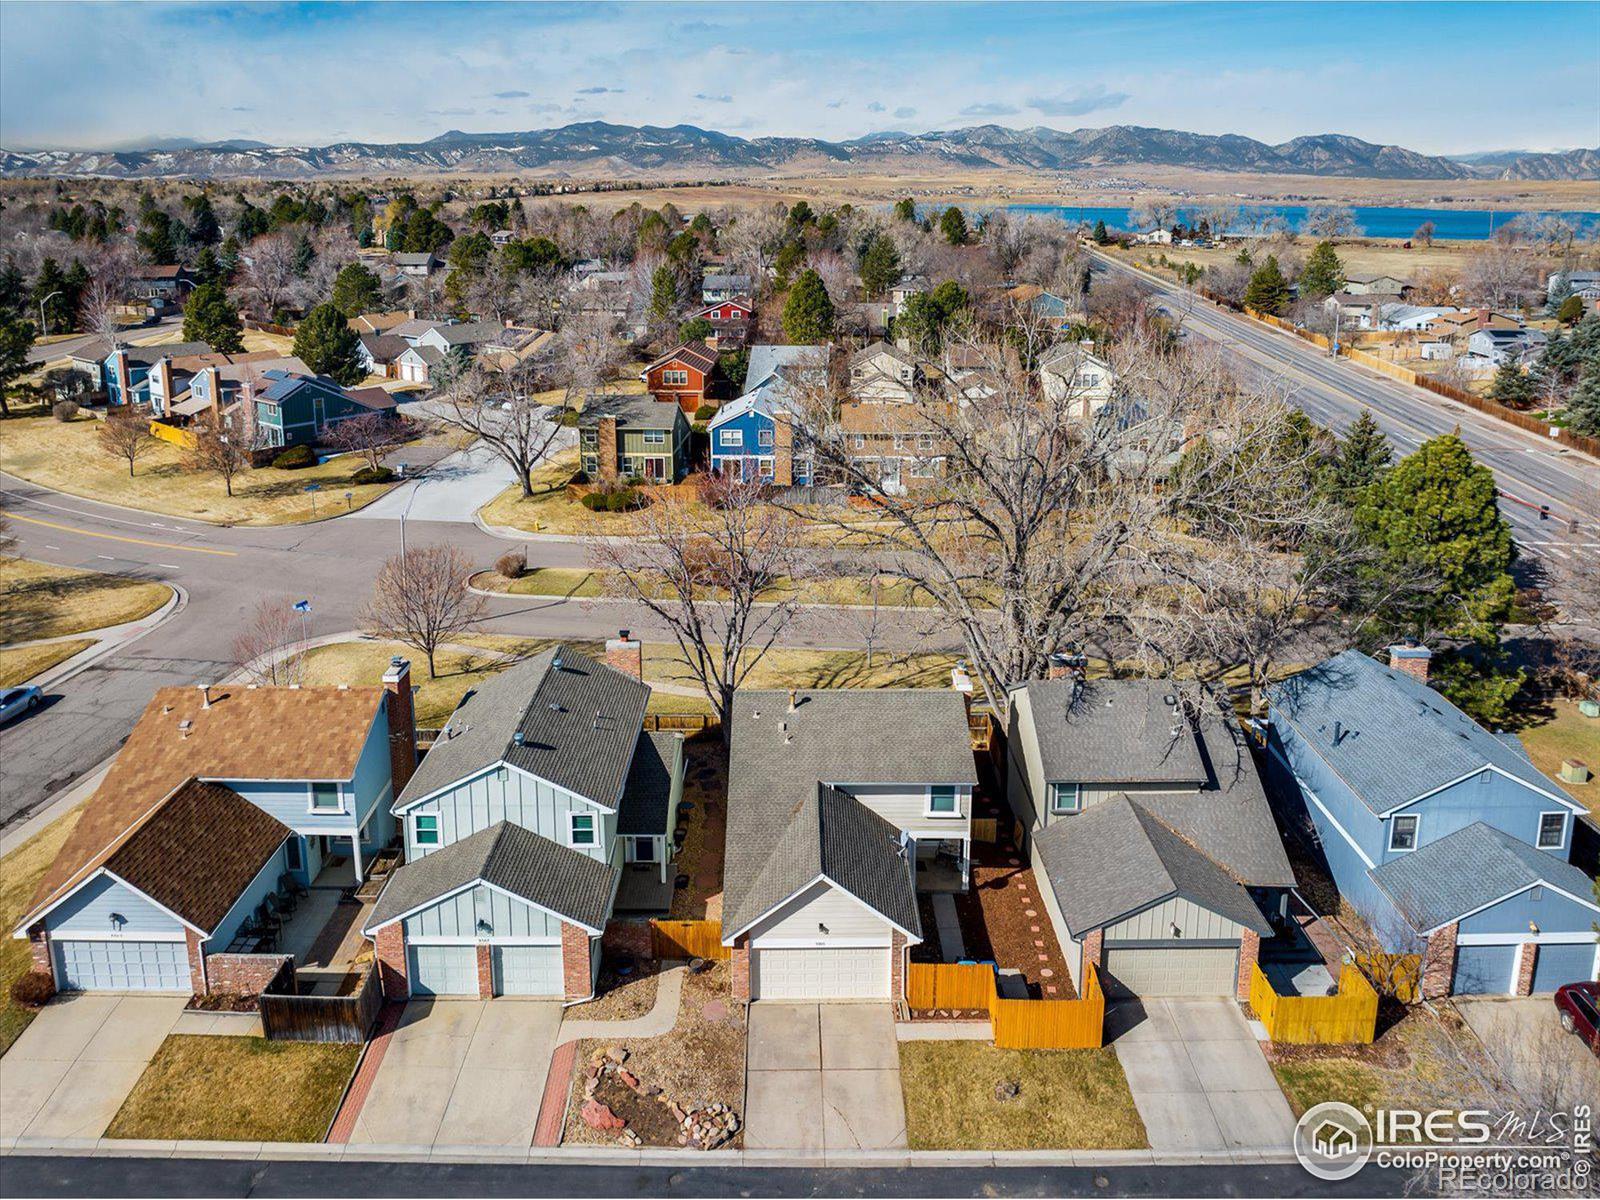 9305 w 87th place, Arvada sold home. Closed on 2024-03-27 for $541,500.